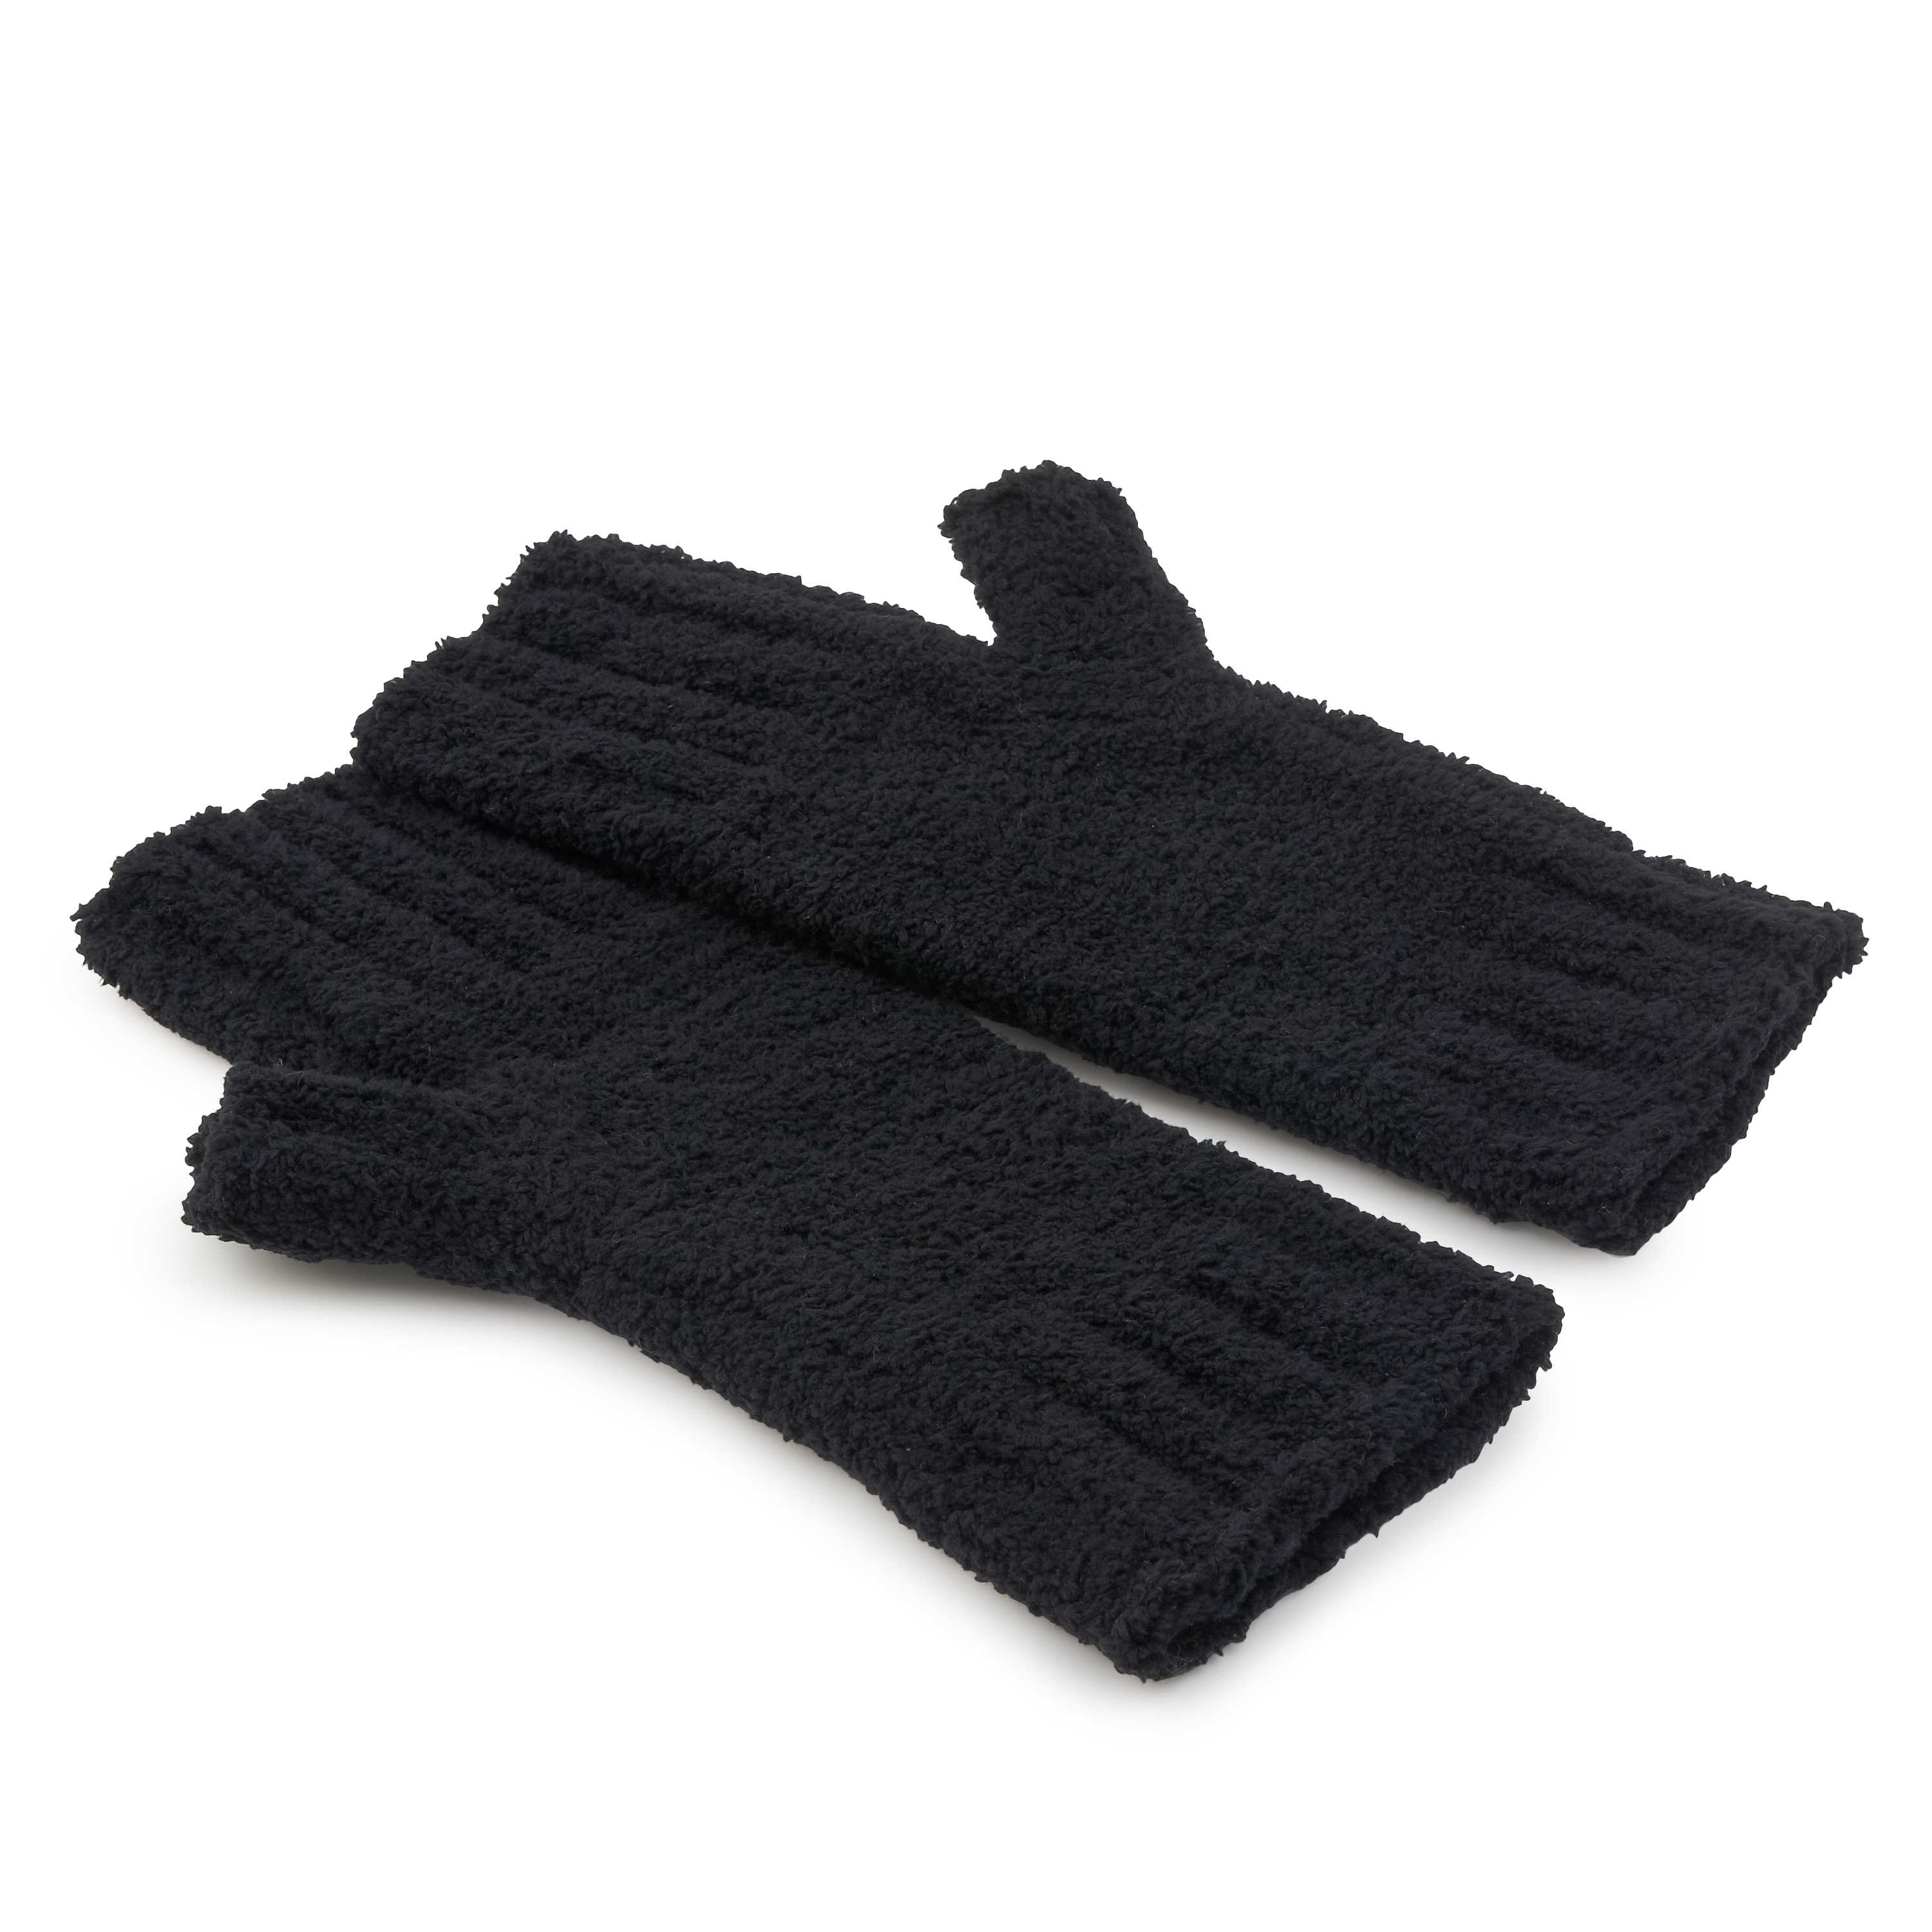 CABLE MITTEN